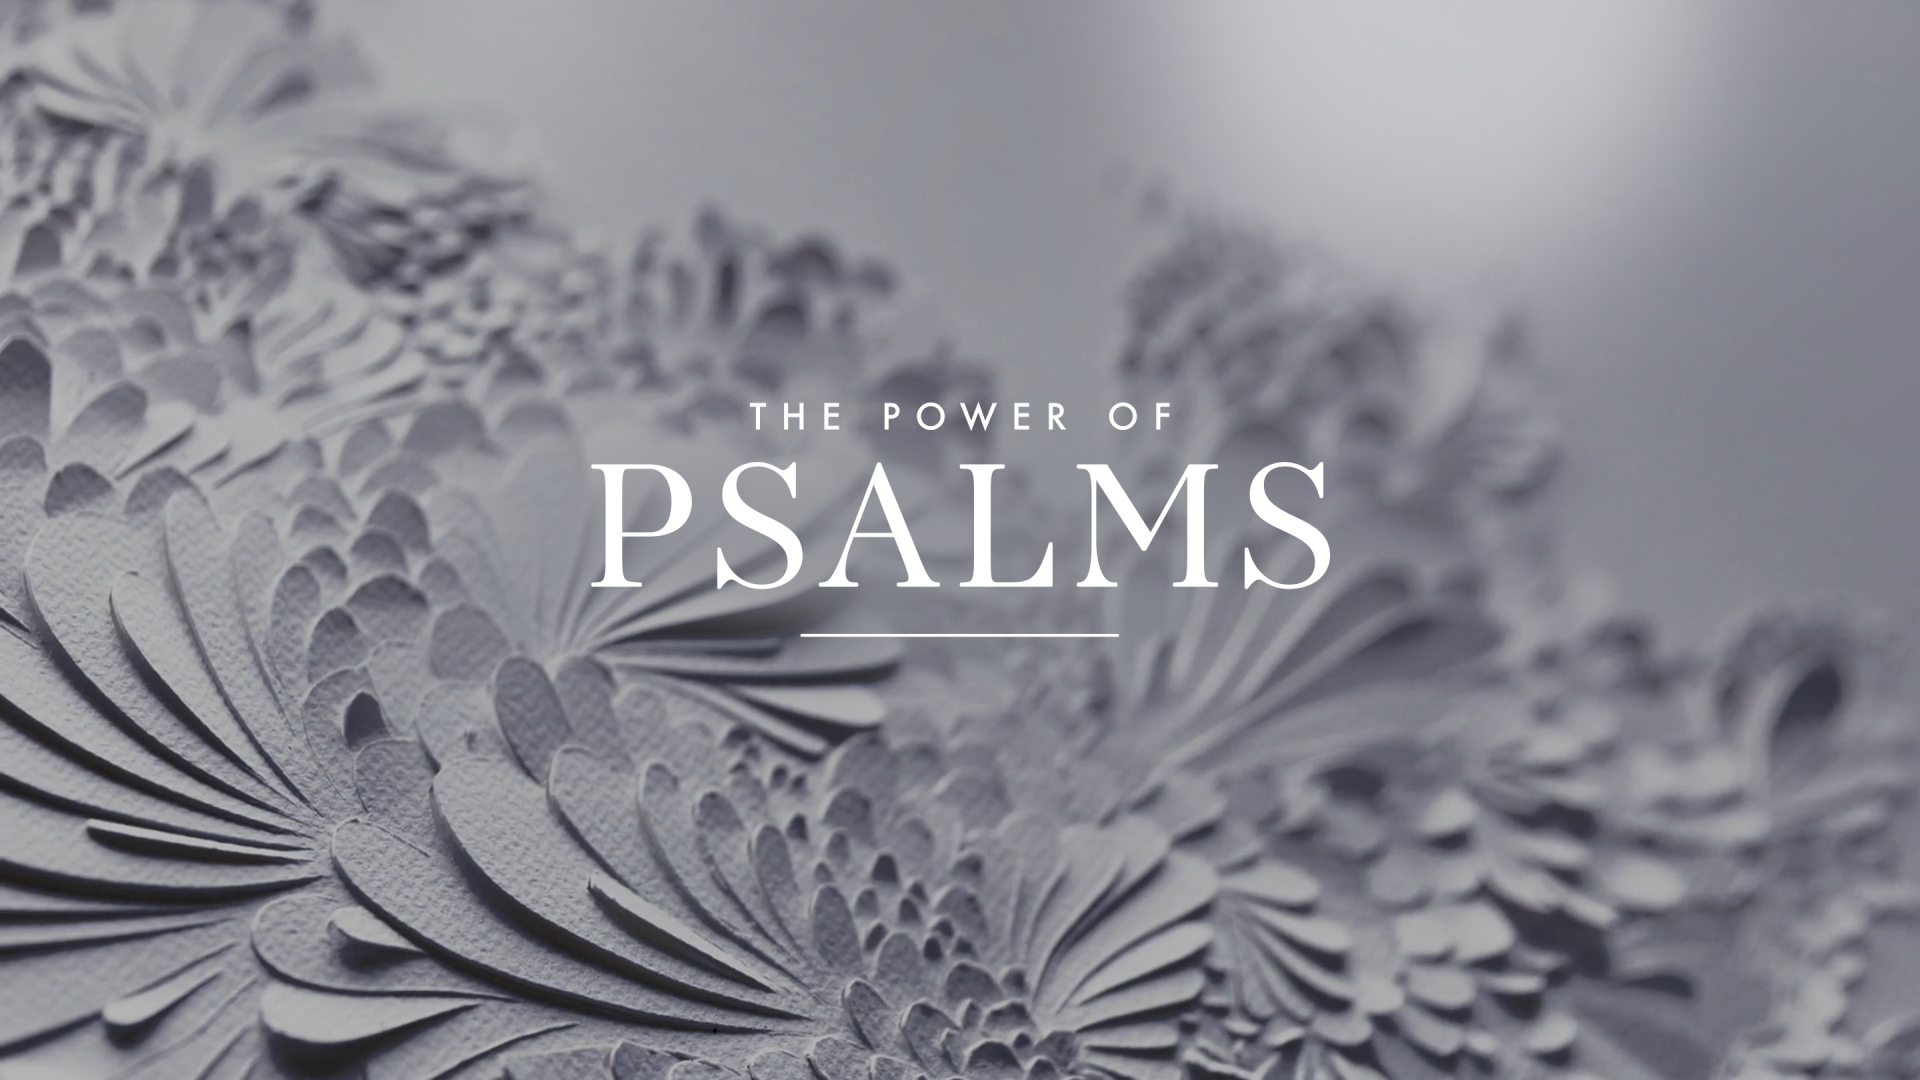 The Power of Psalms